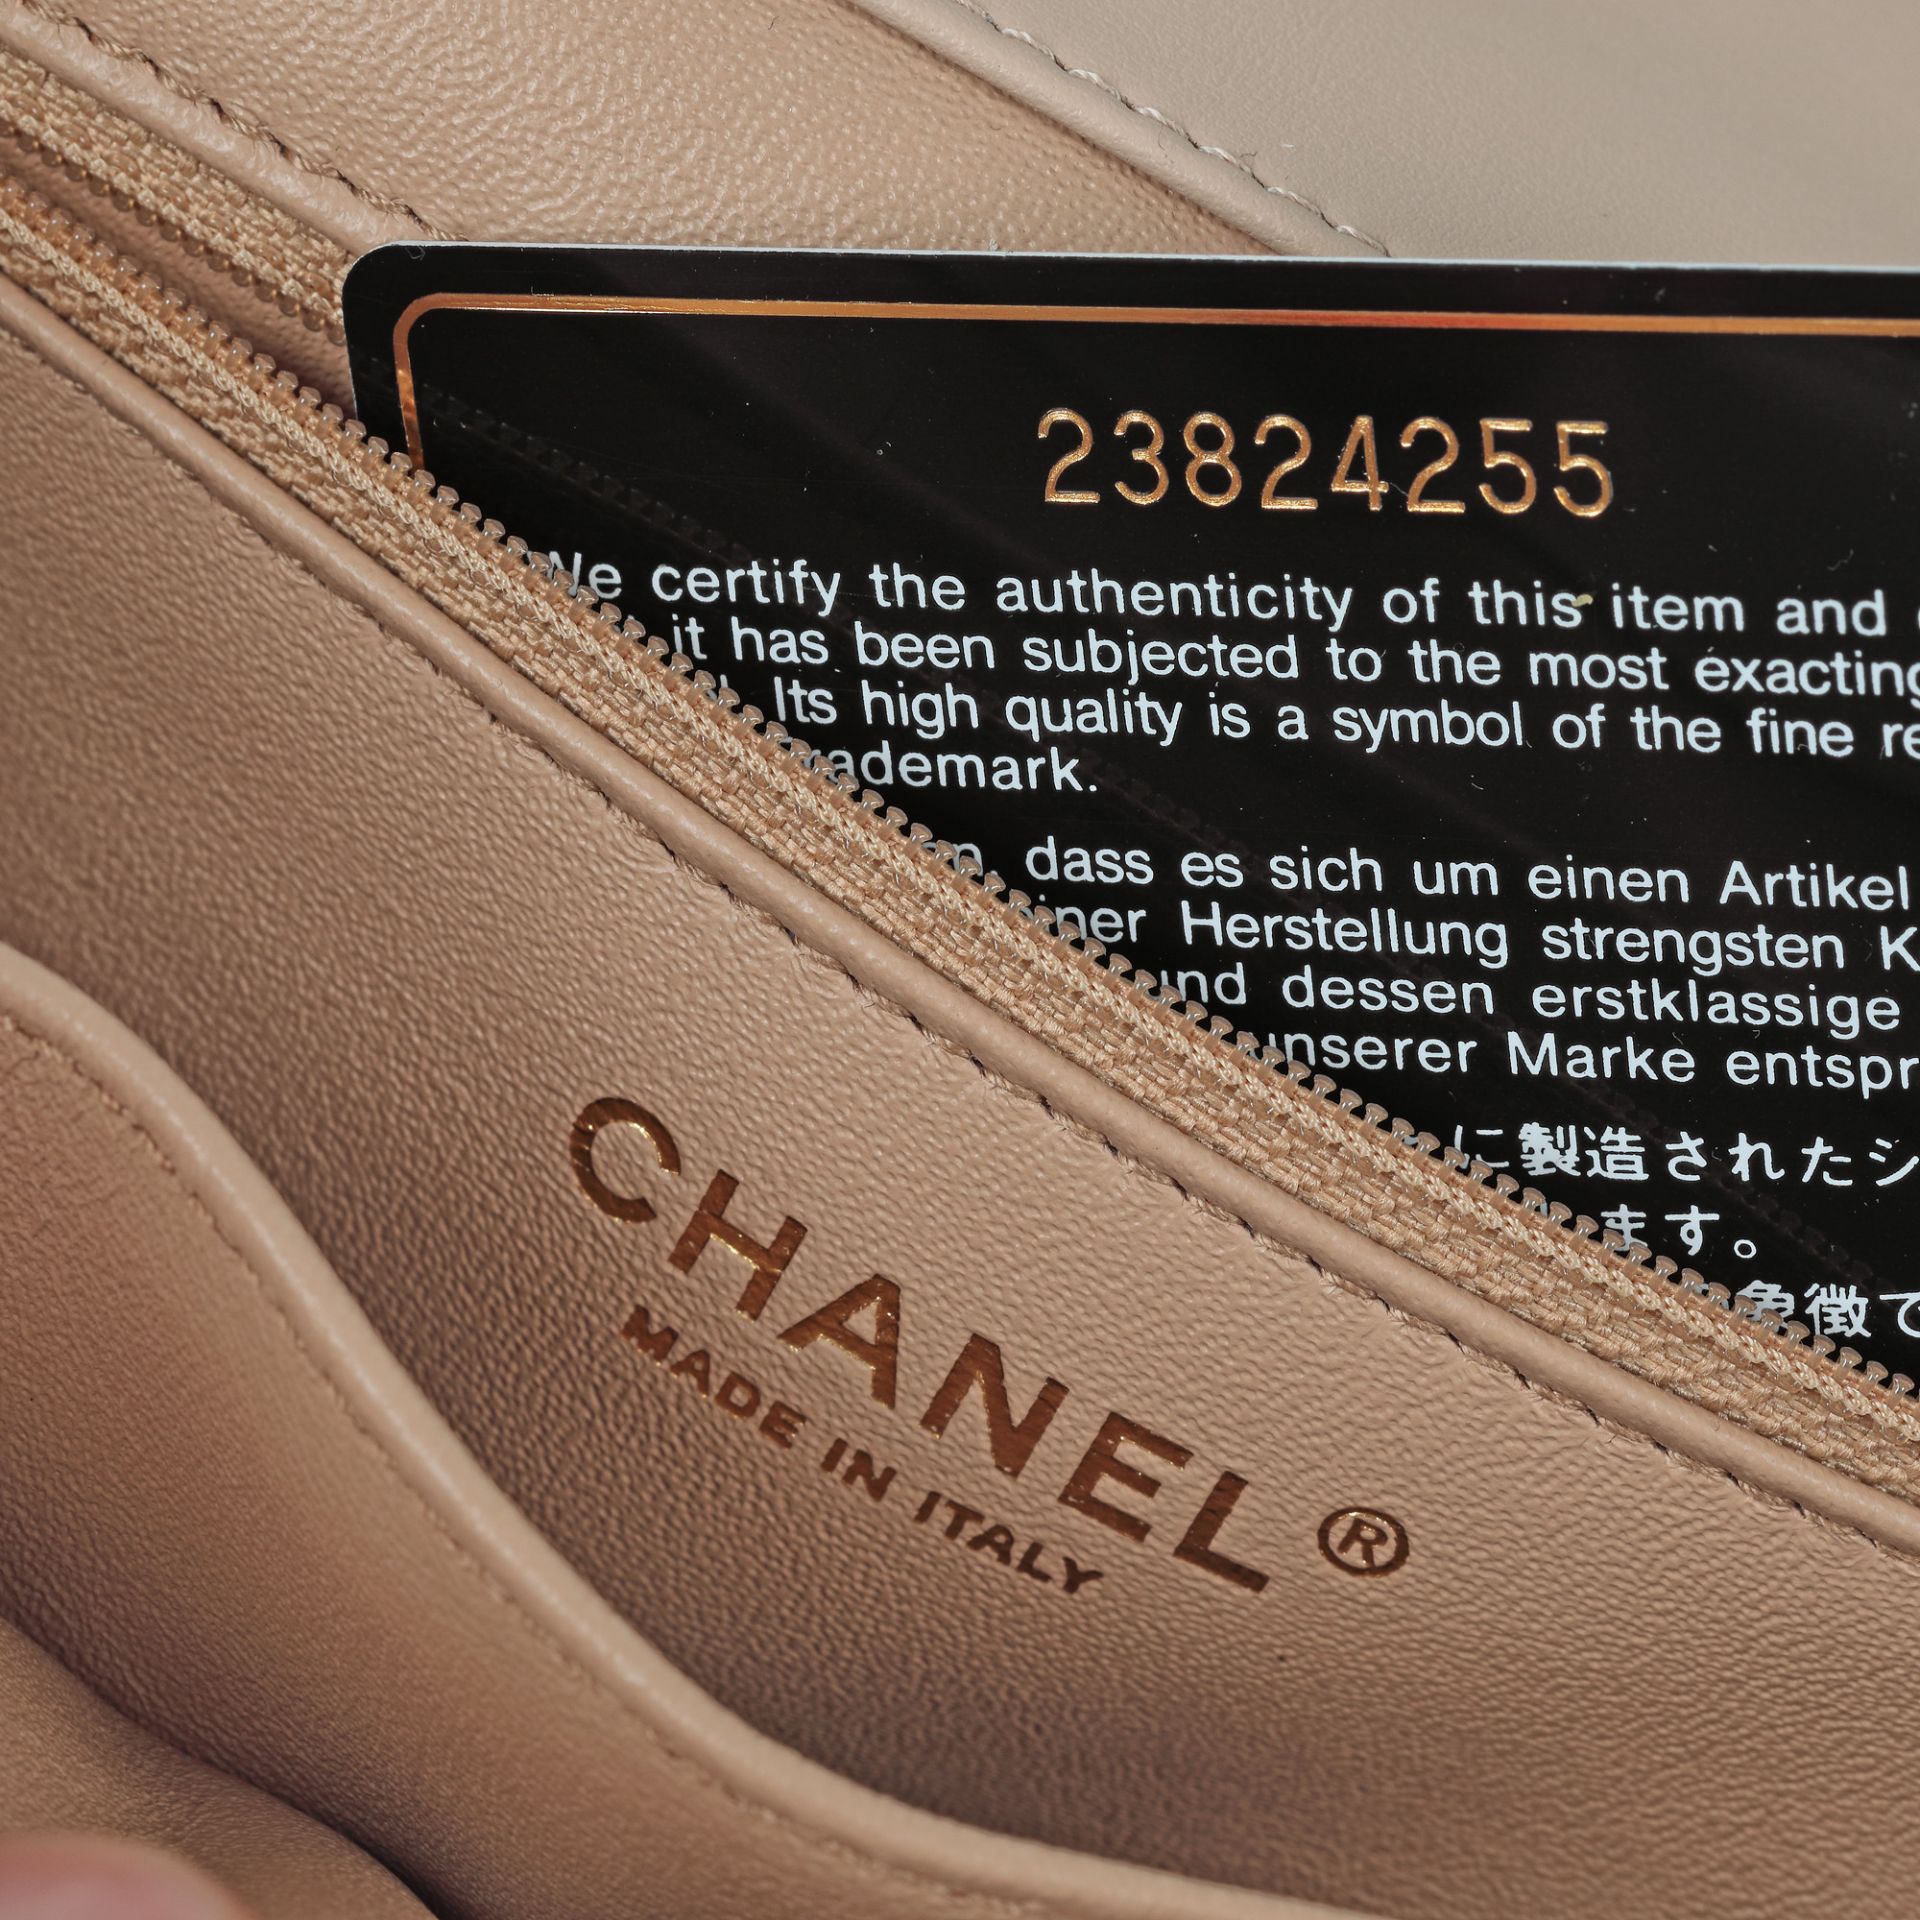 "Business Affinity Flap Bag" - Chanel bag, partially quilted Caviar leather, beige - Image 4 of 4